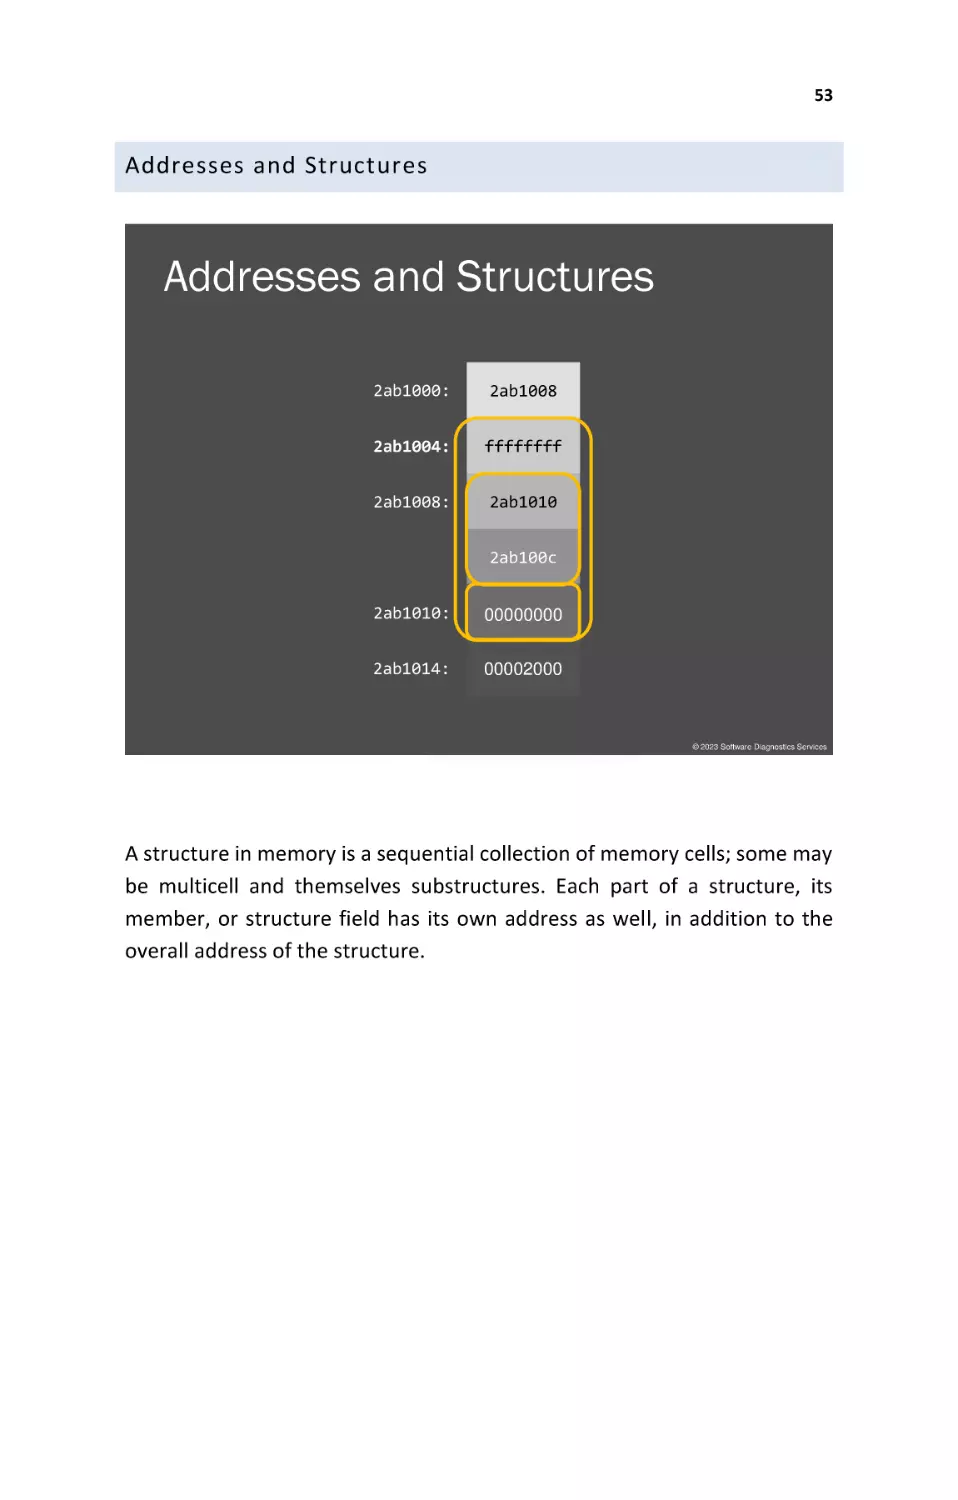 Addresses and Structures